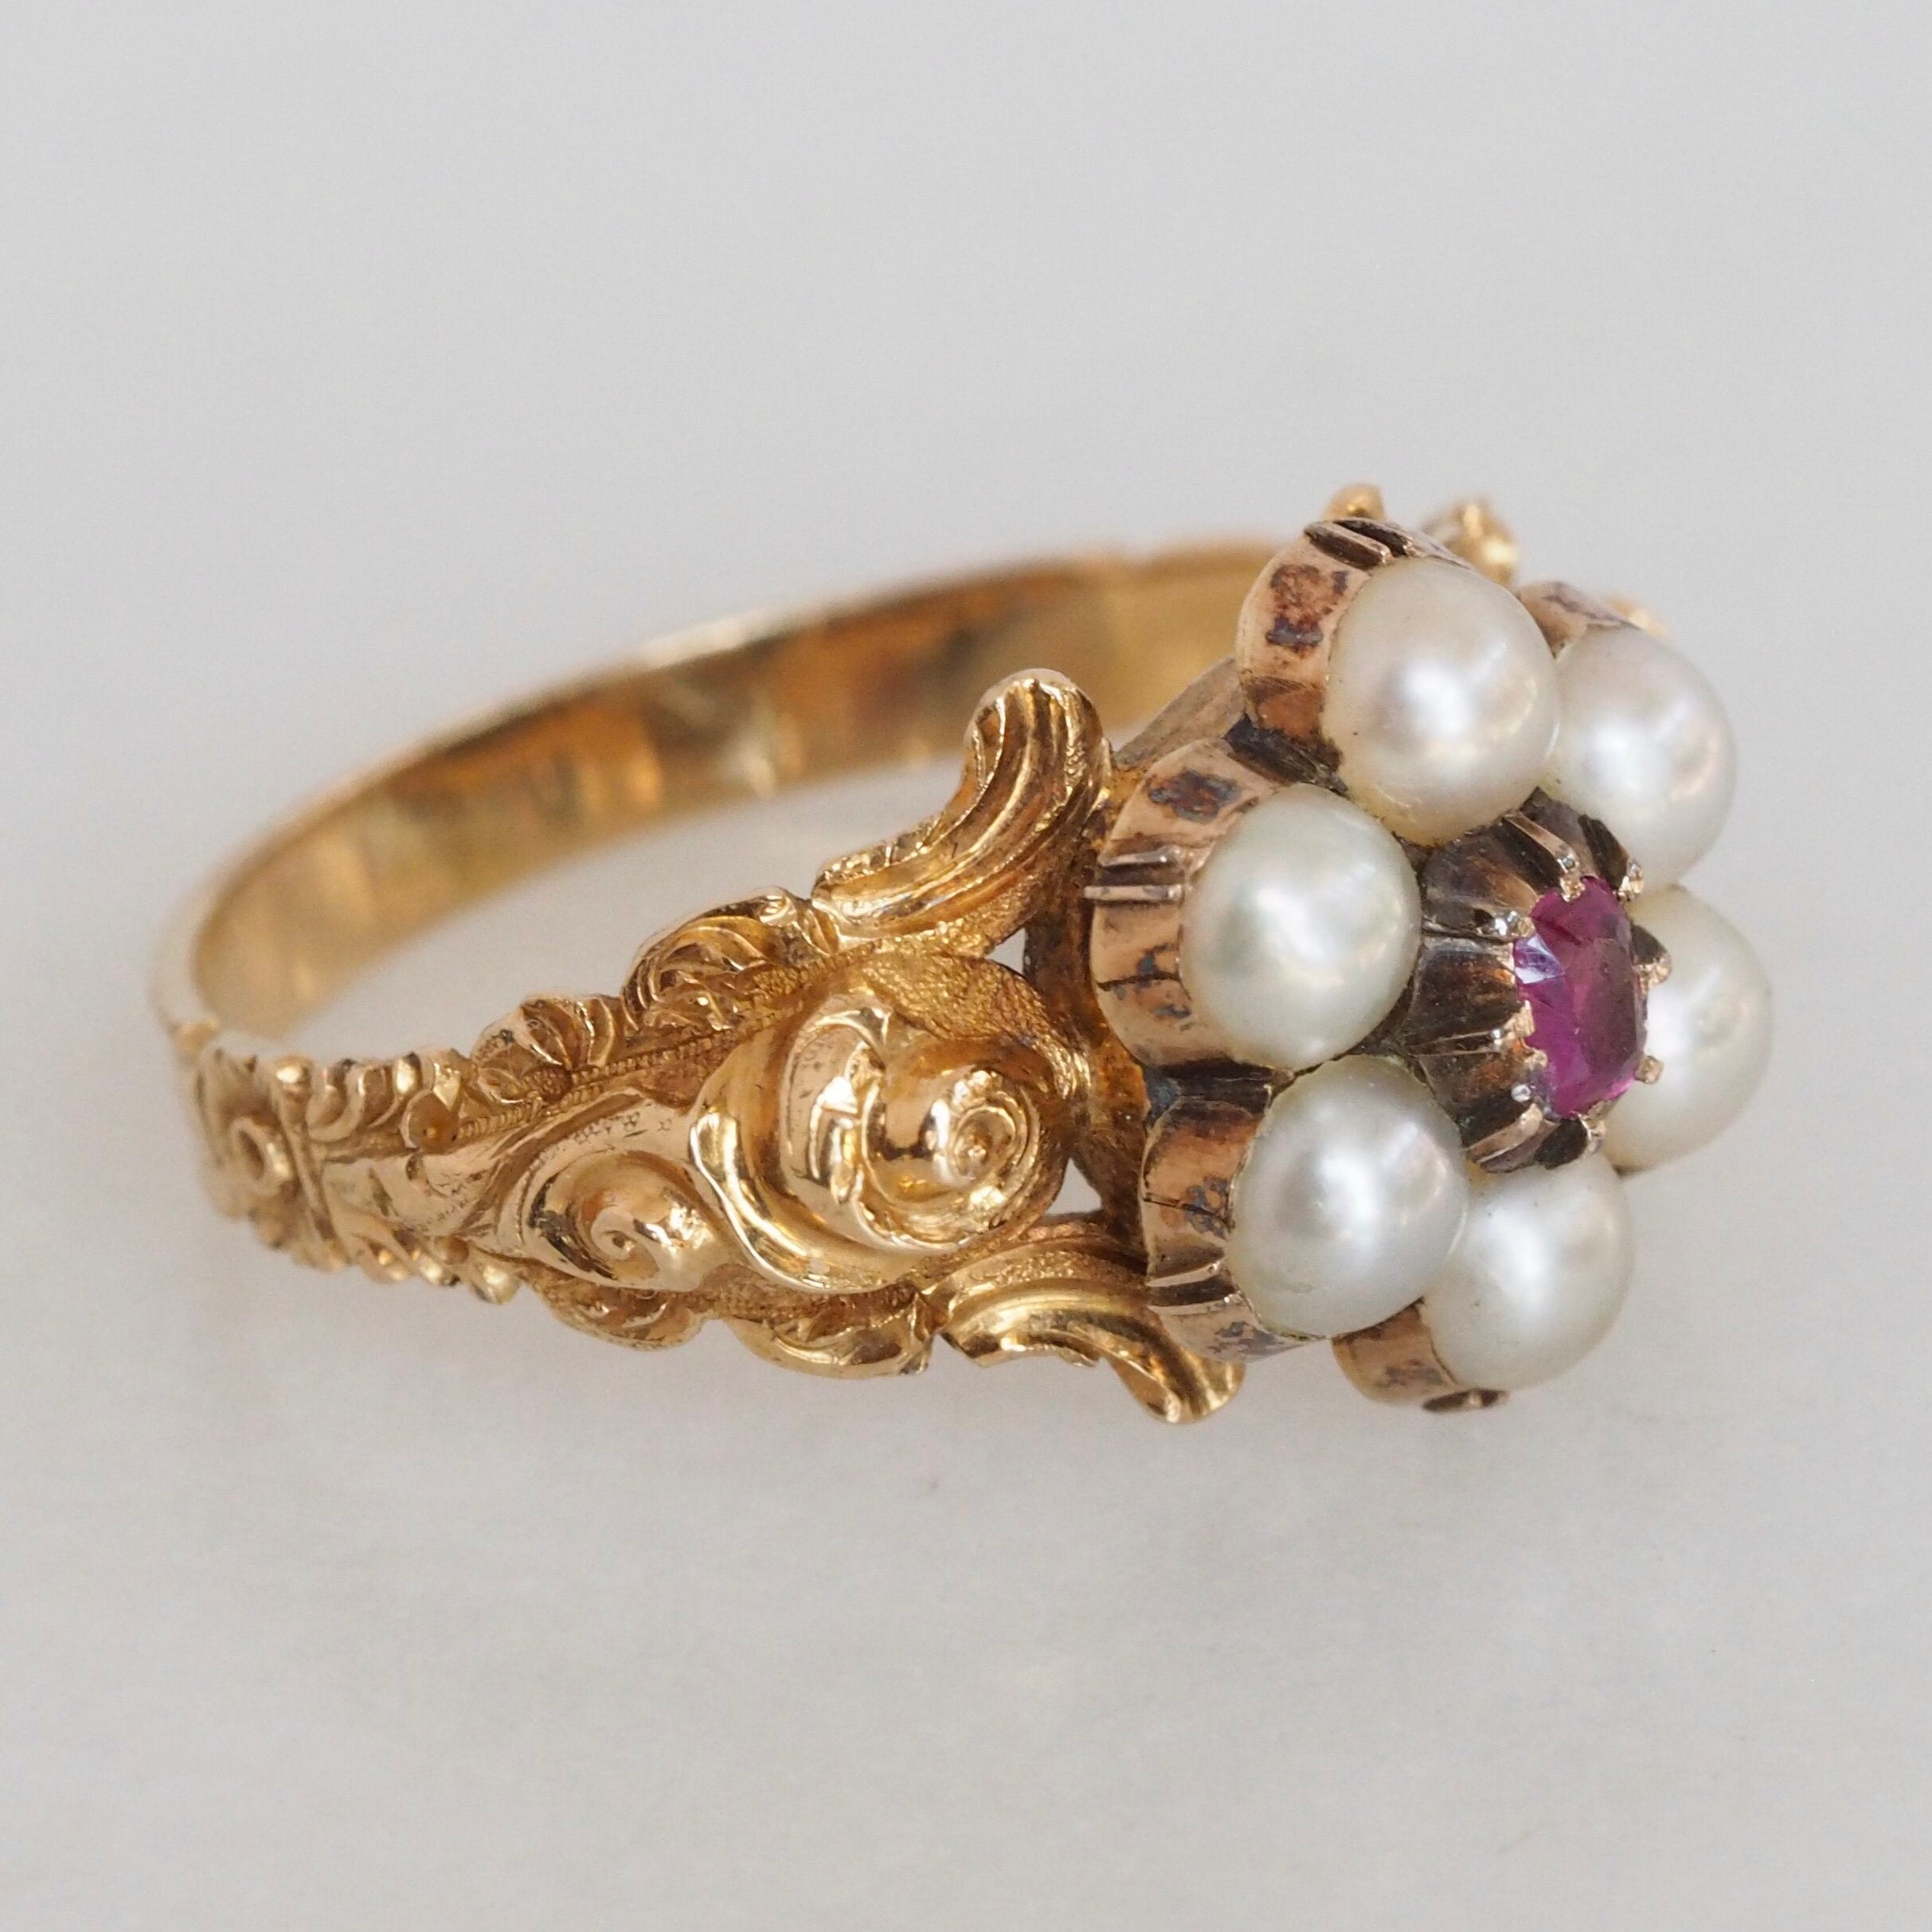 Antique Georgian 18k Gold Ruby and Pearl Halo Ring